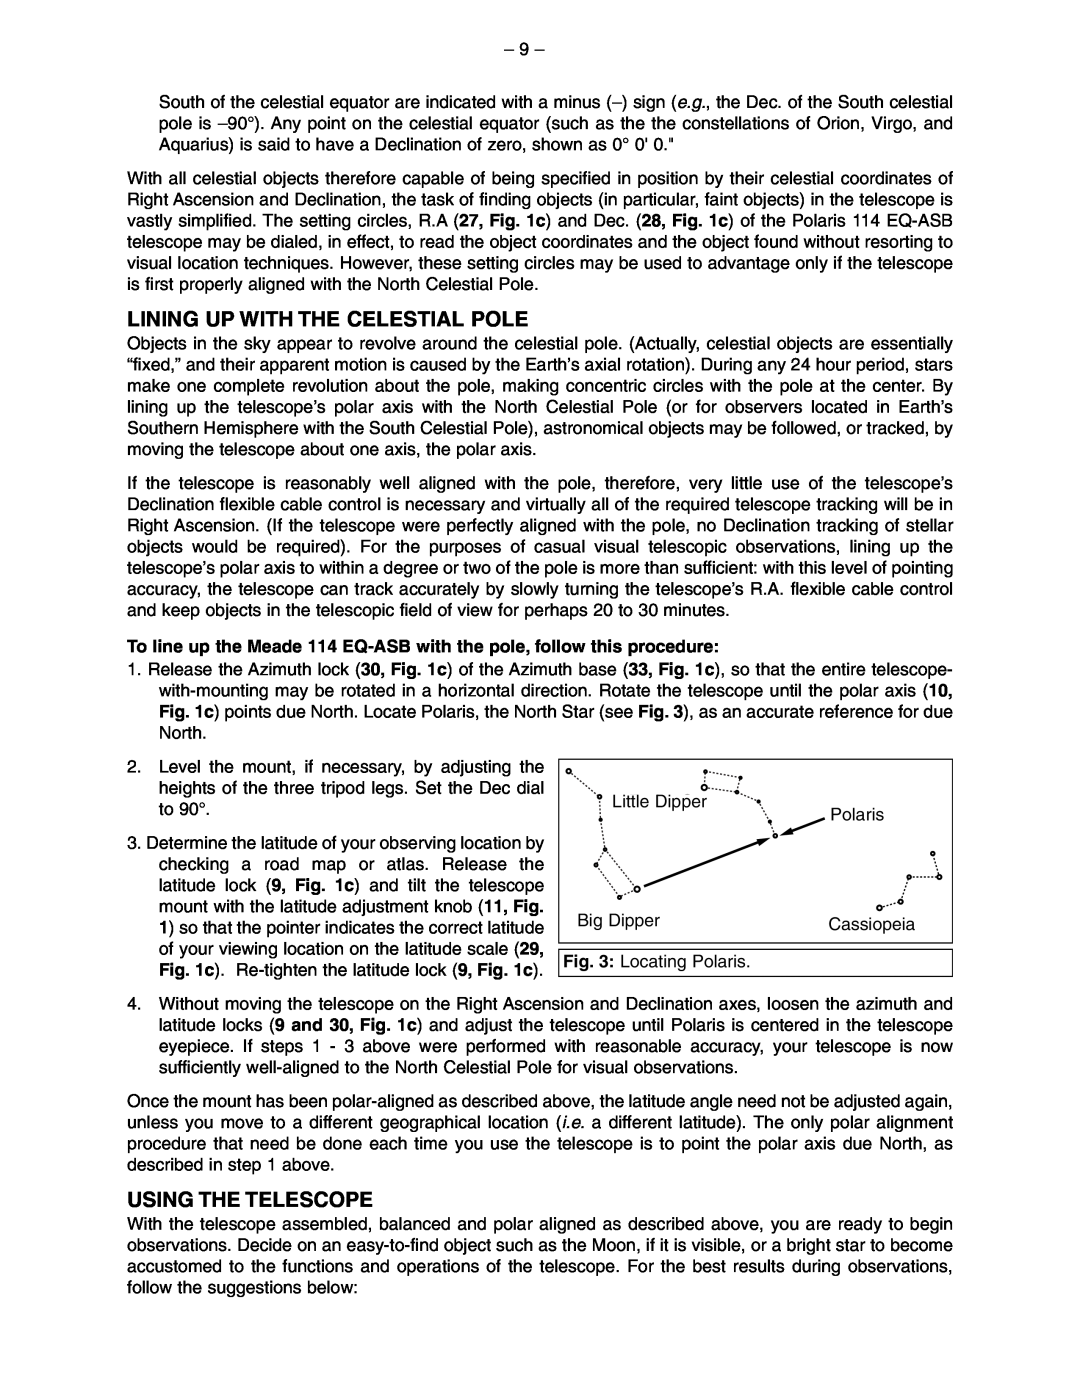 Meade 114 EQ-ASB instruction manual Lining Up With The Celestial Pole, Using The Telescope 